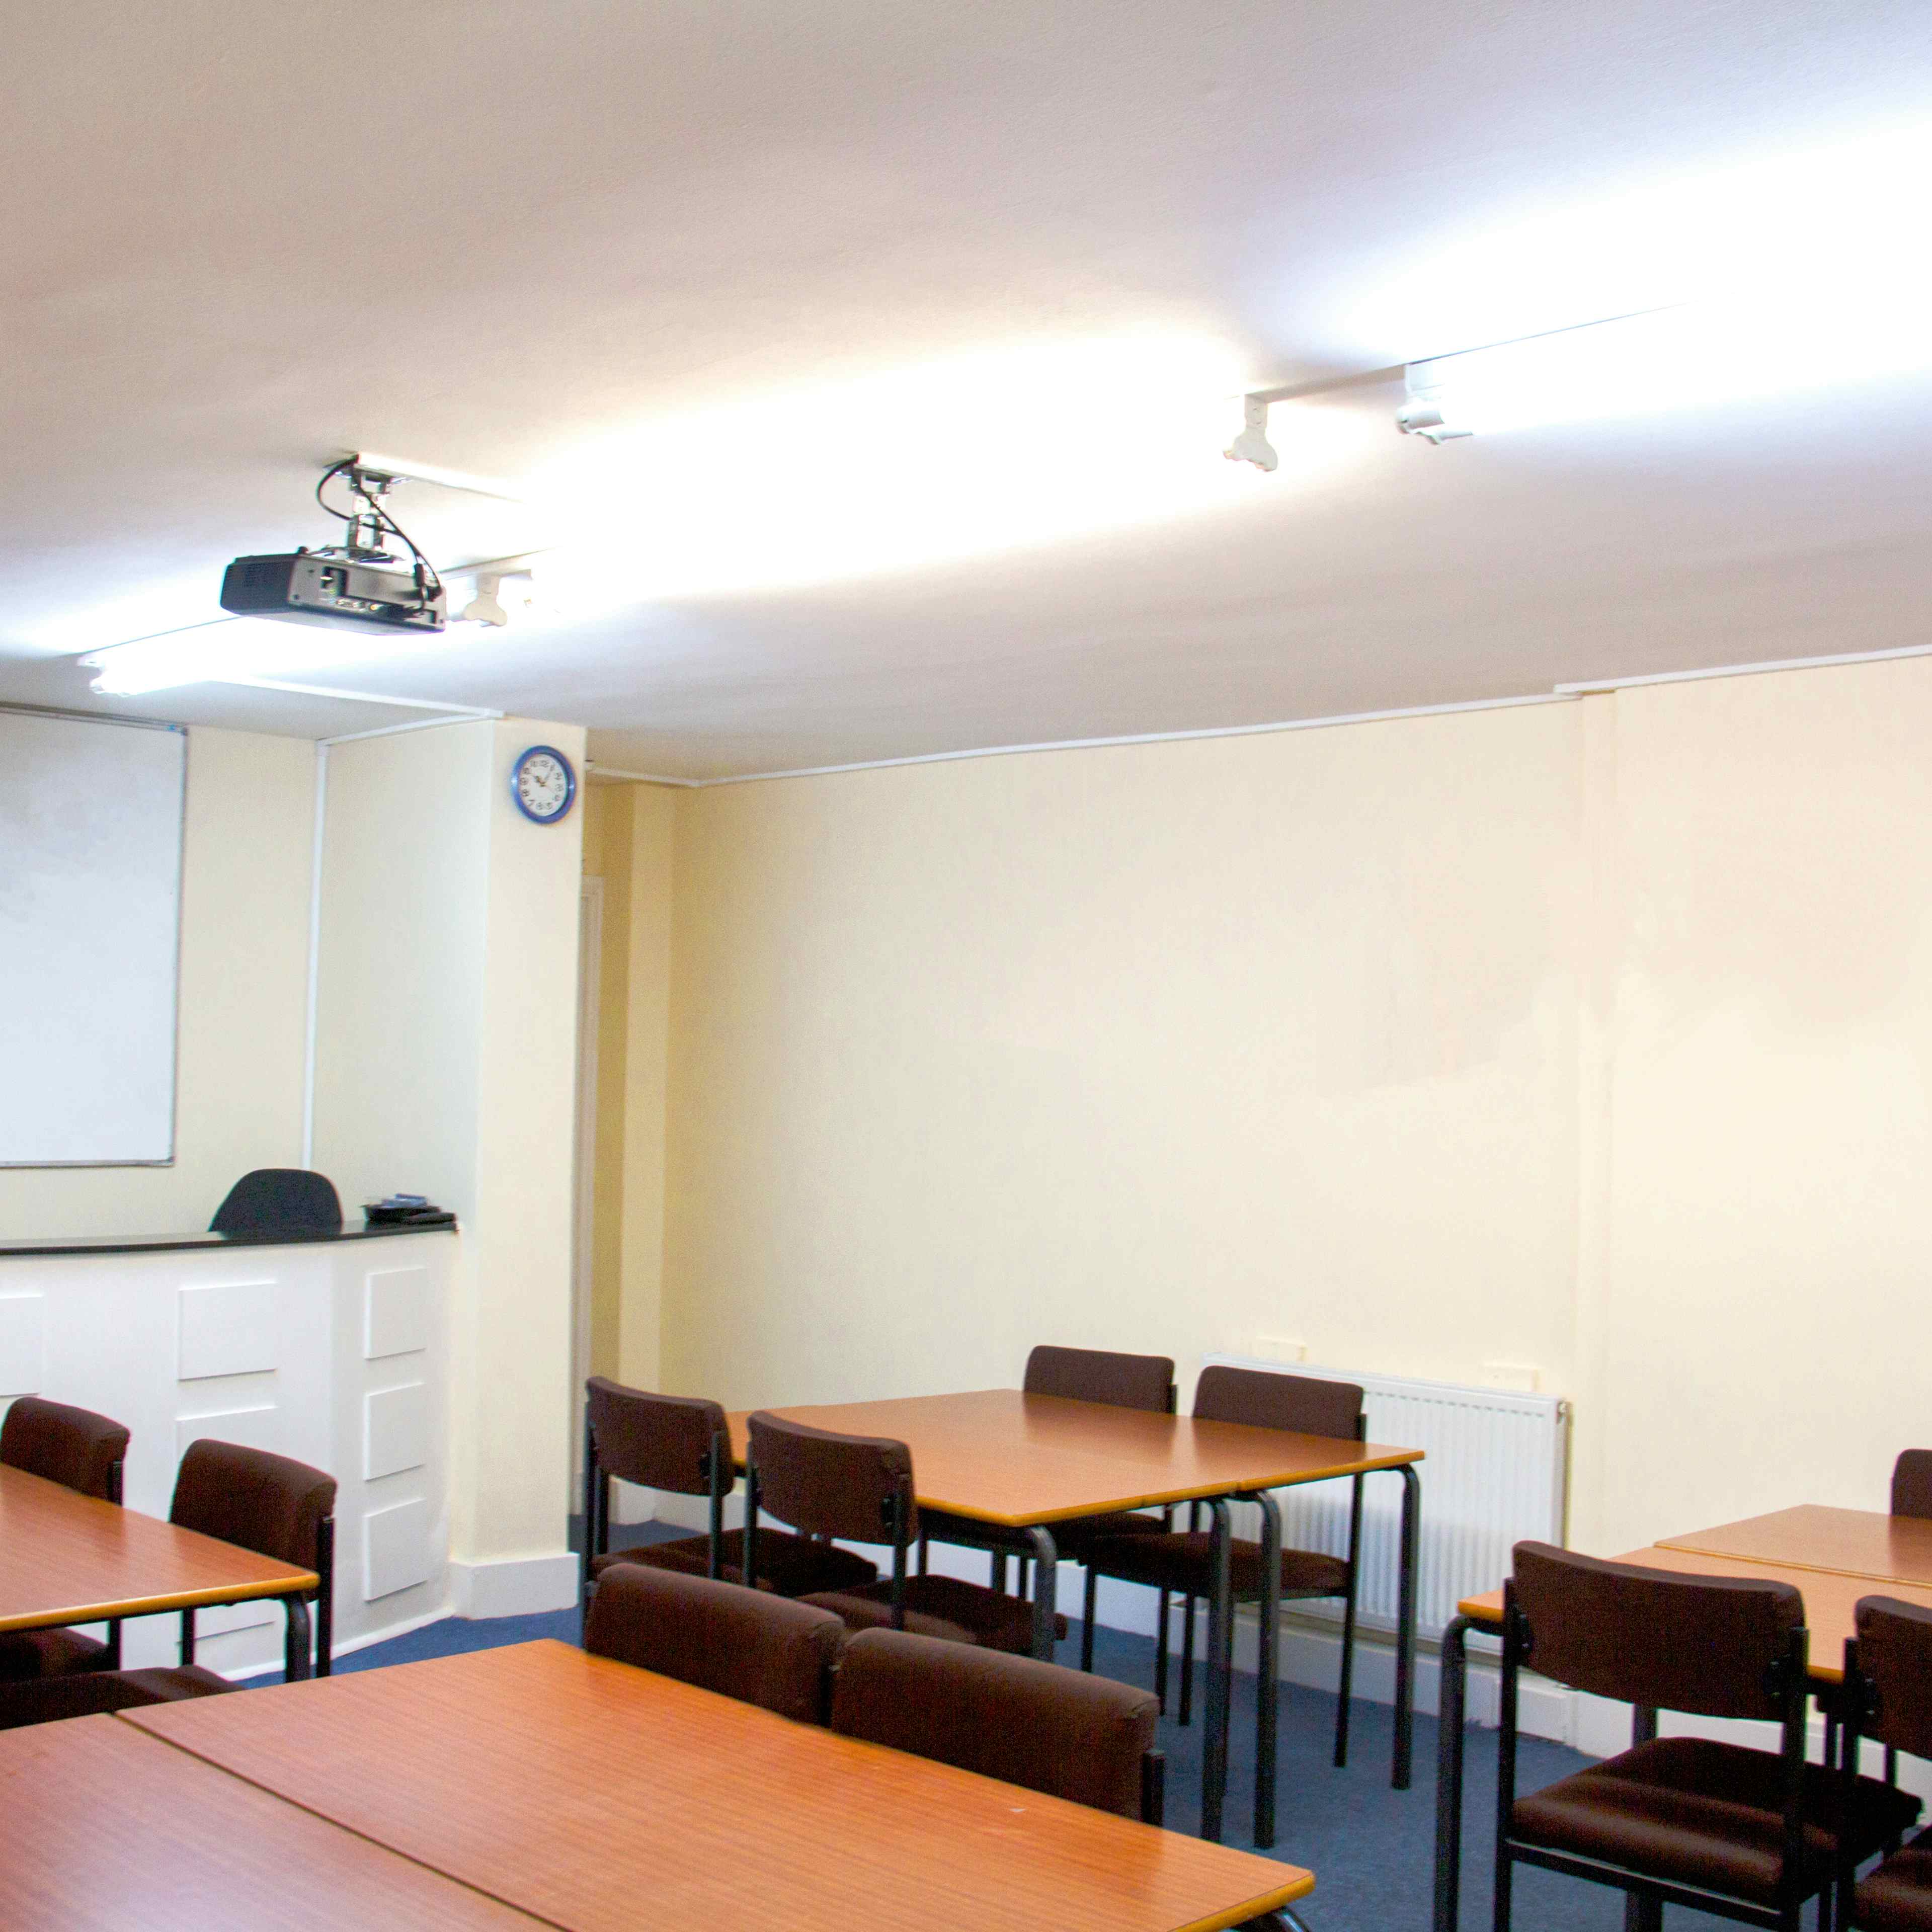 My Meeting Space - North London College - Meeting Room/Classroom 106 image 3